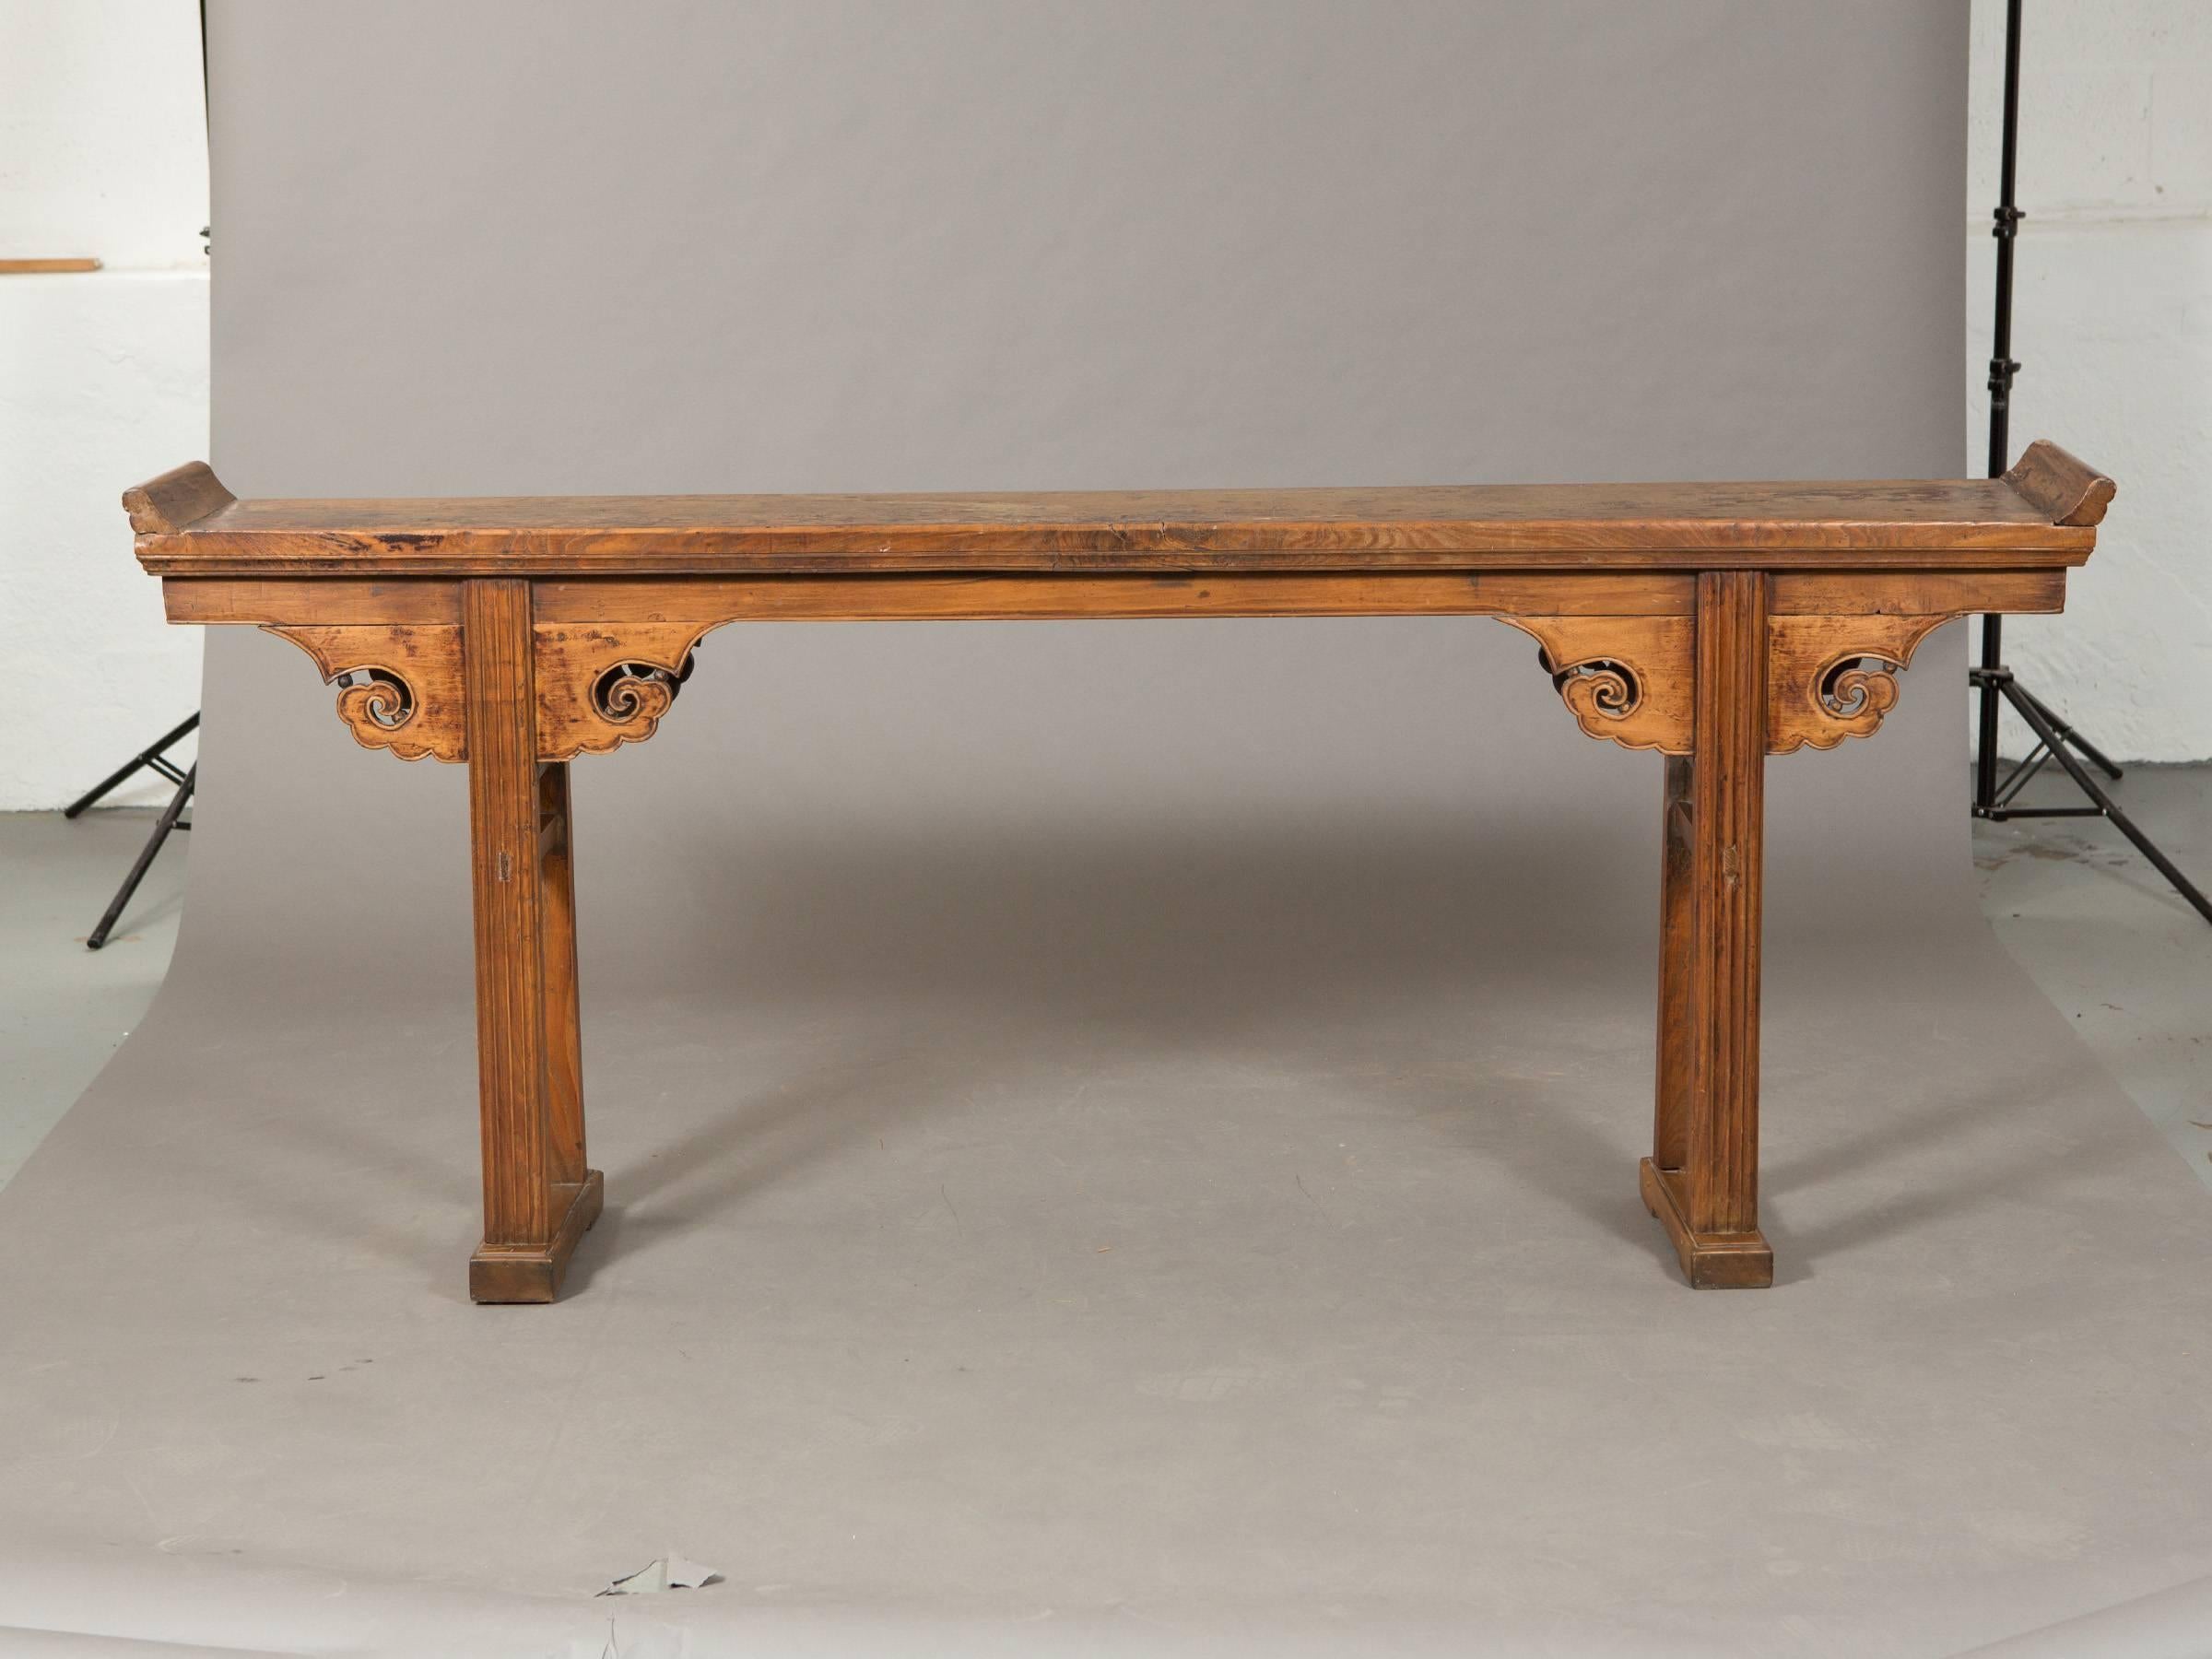 19th century Qing dynasty Chinese elm altar table with intricate hand-carved details and nice patina.